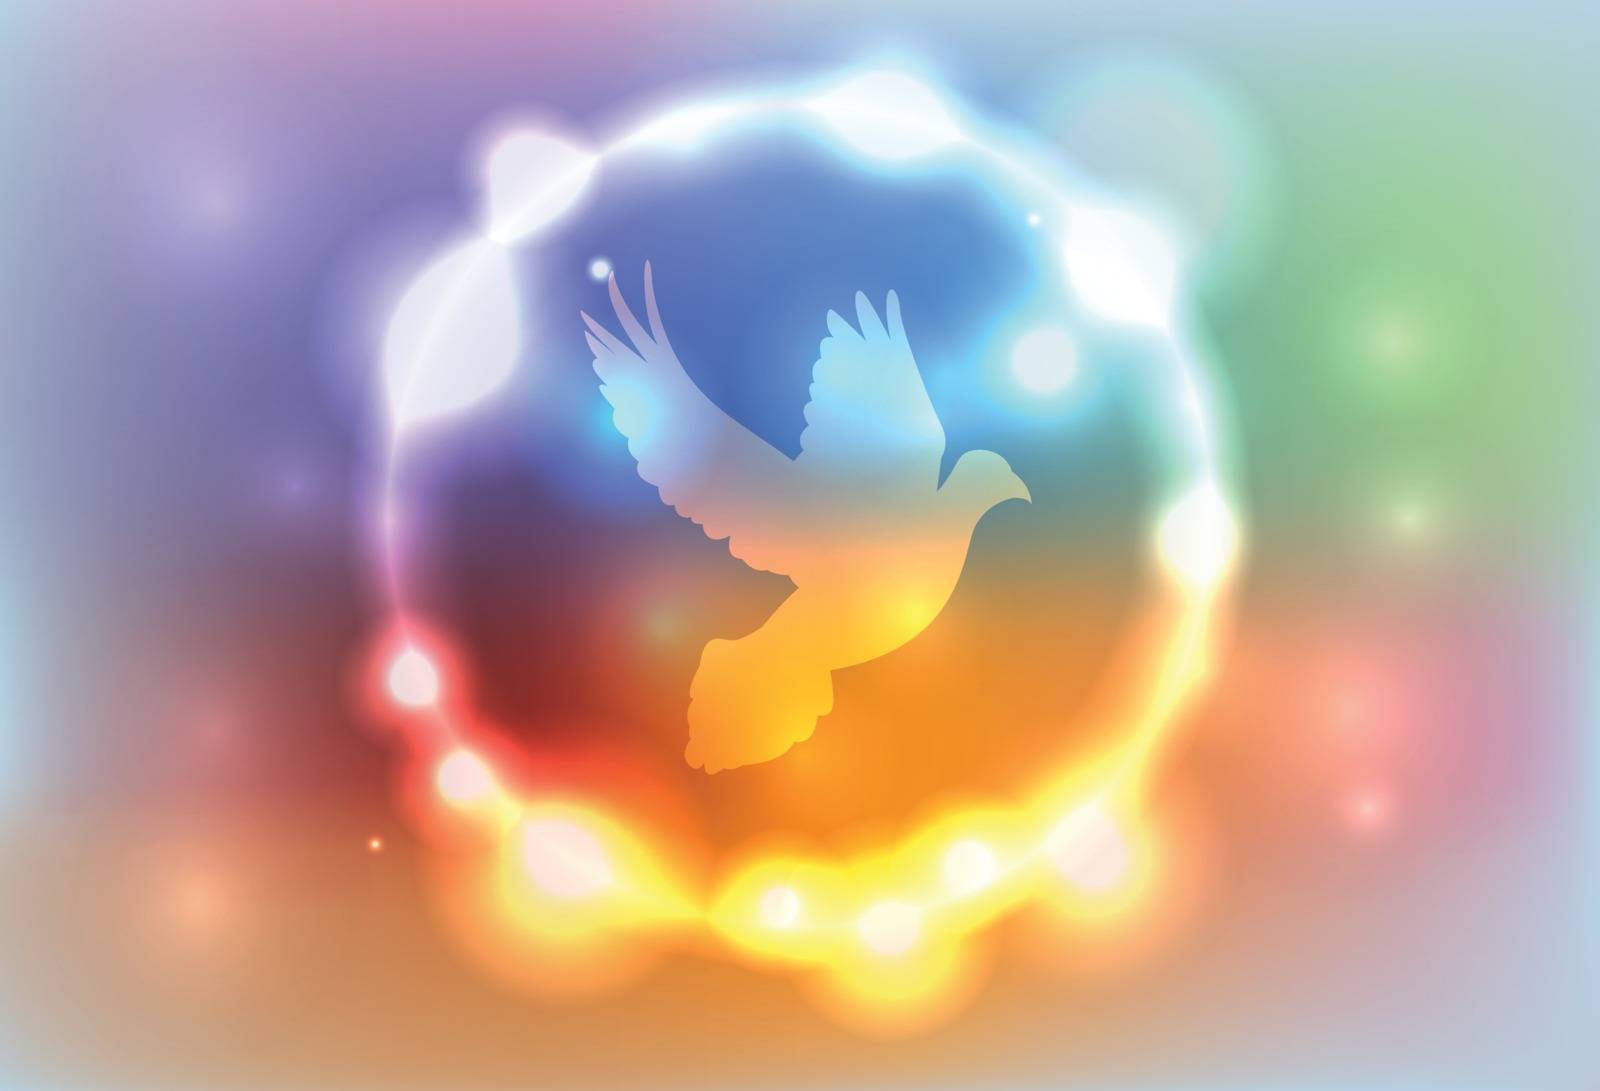 An illustration of a dove surrounded by a colorful abstract glowing lights. Vector EPS 10 available. EPS file contains transparencies and a gradient mesh.